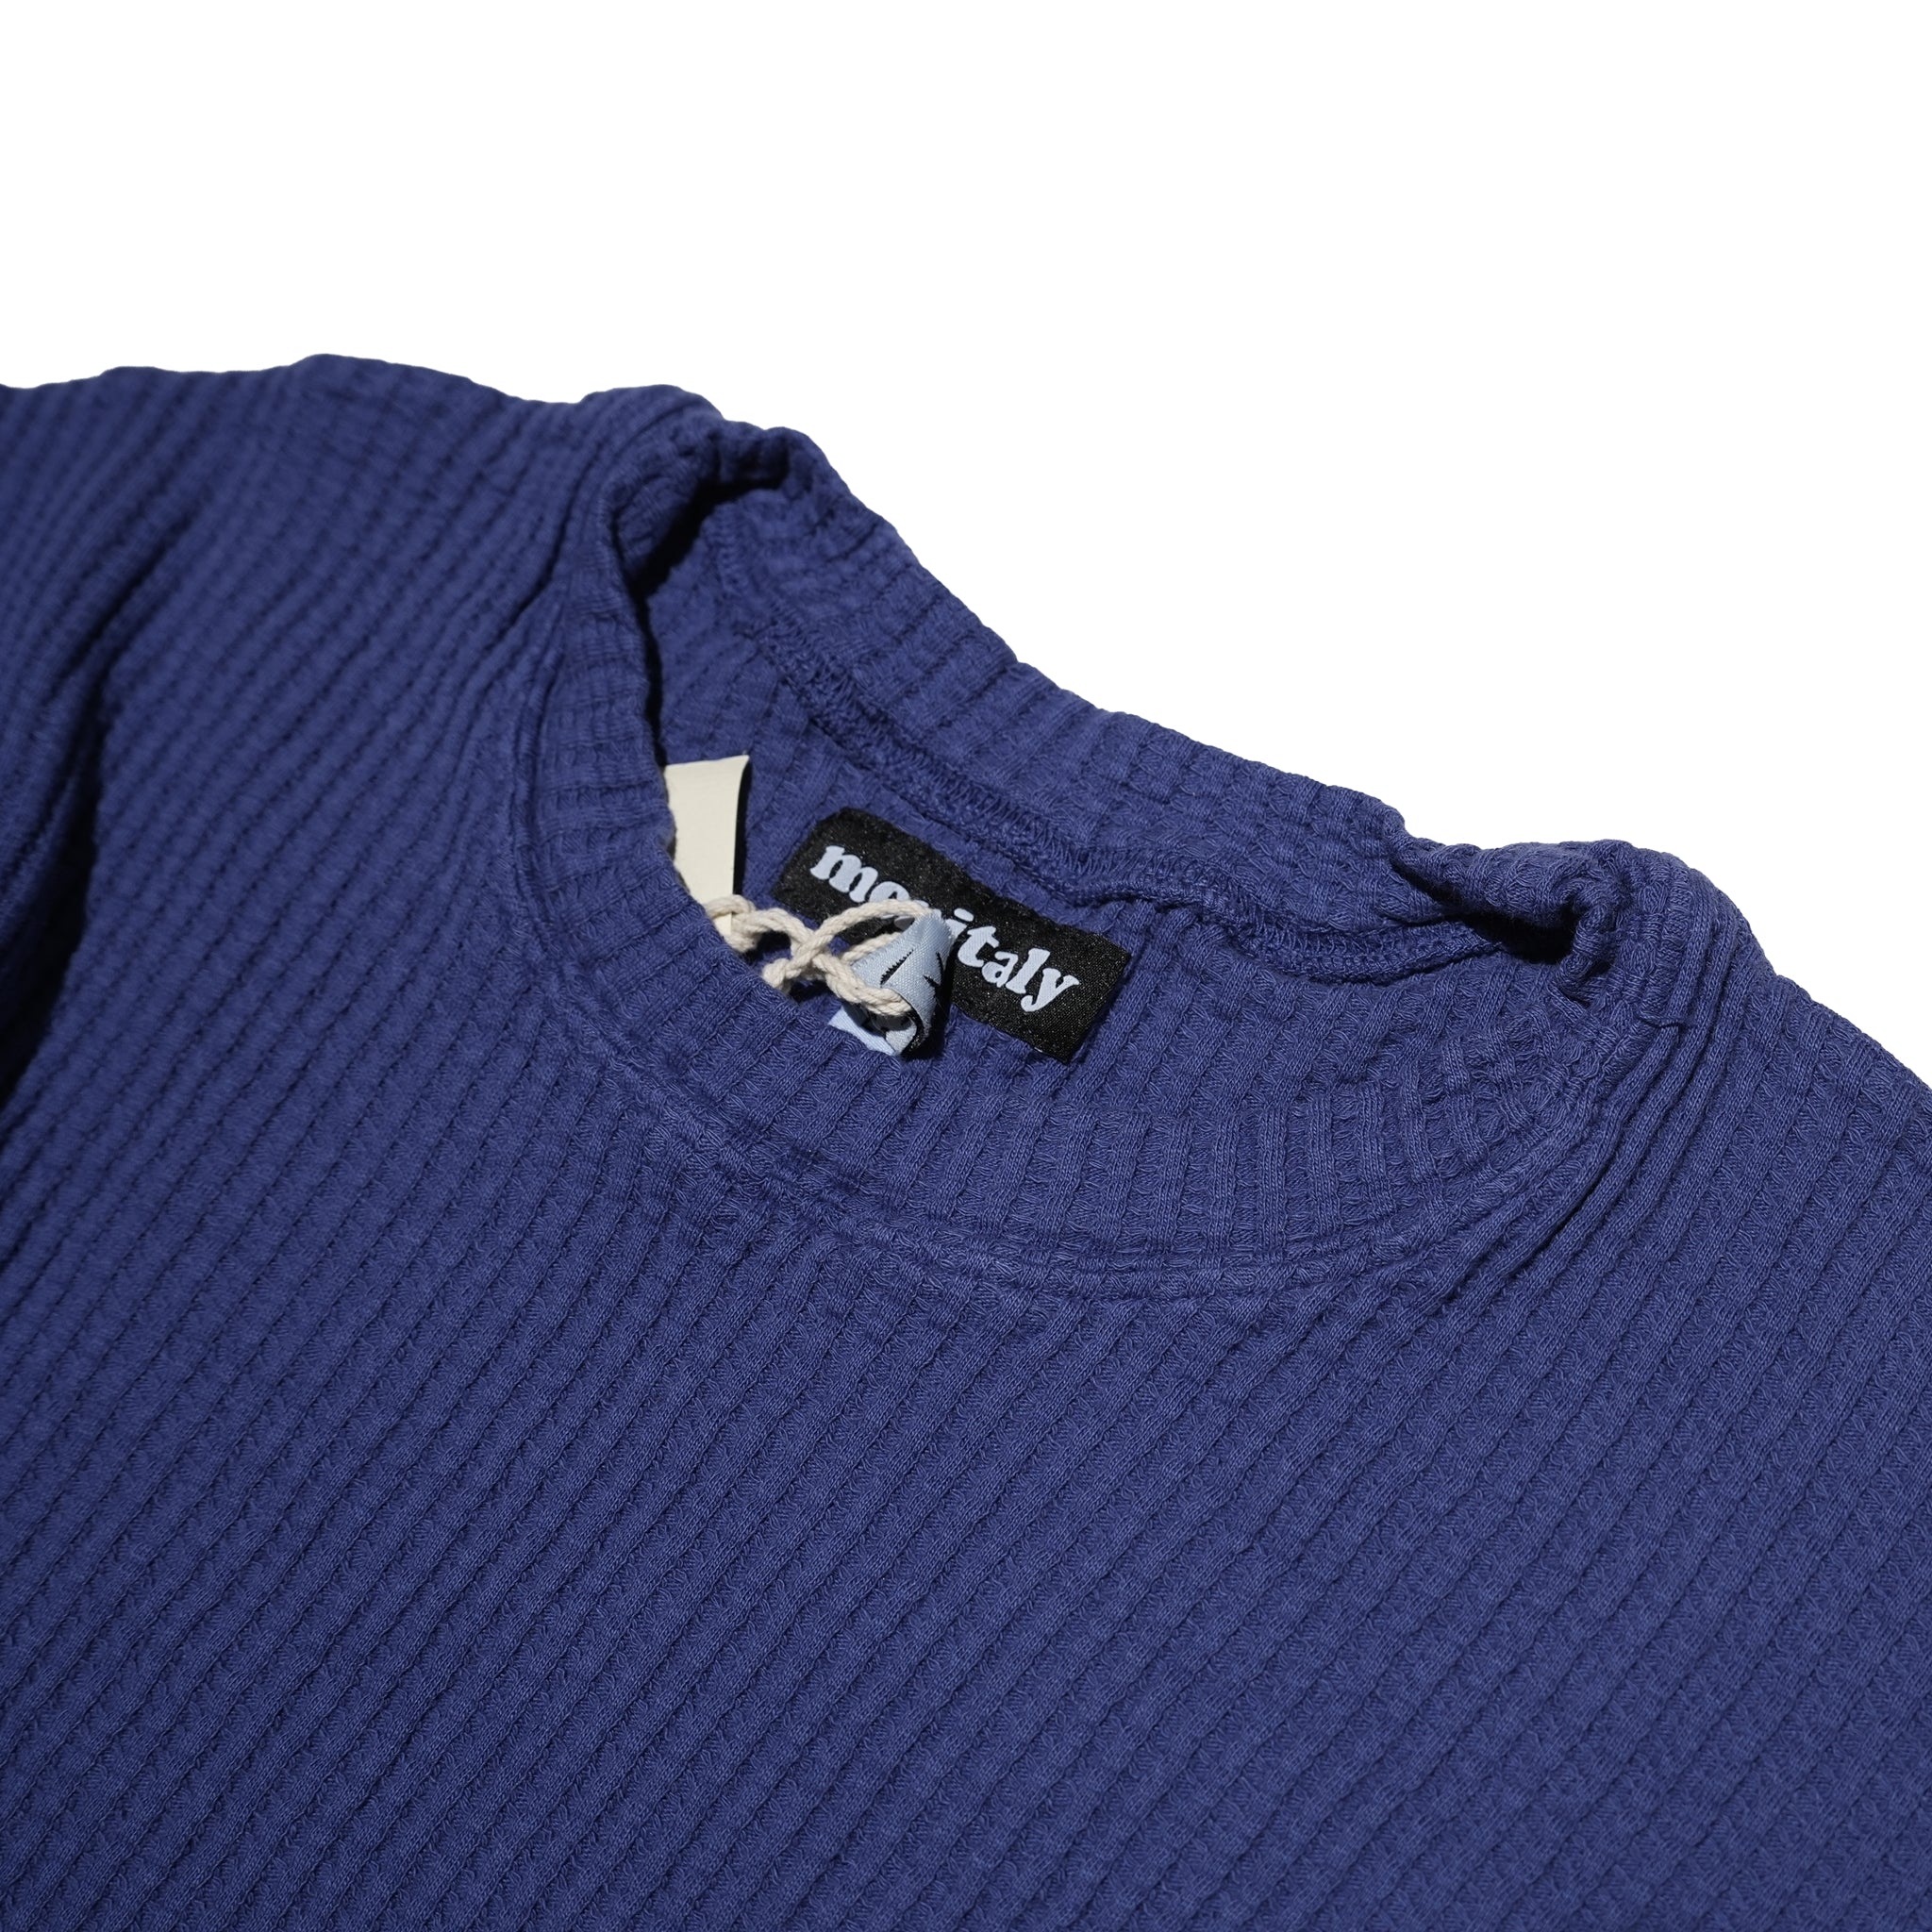 No:M31752-10 | Name:Thermal Cut Off Edges S/S | Color:Navy【MONITALY_モニタリー】